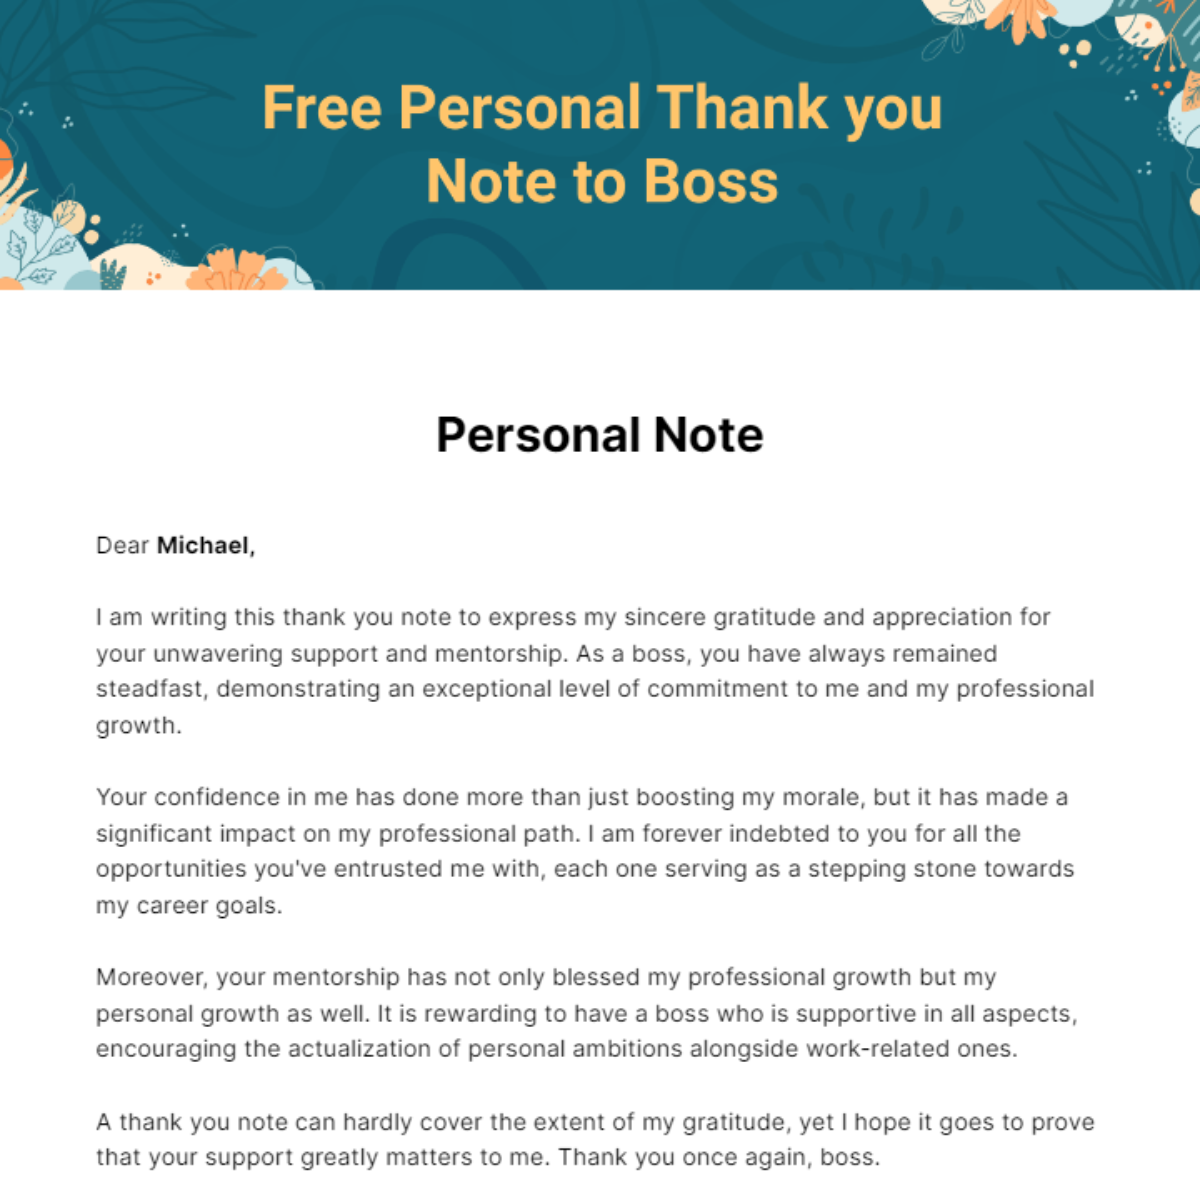 Personal Thank you Note to Boss Template